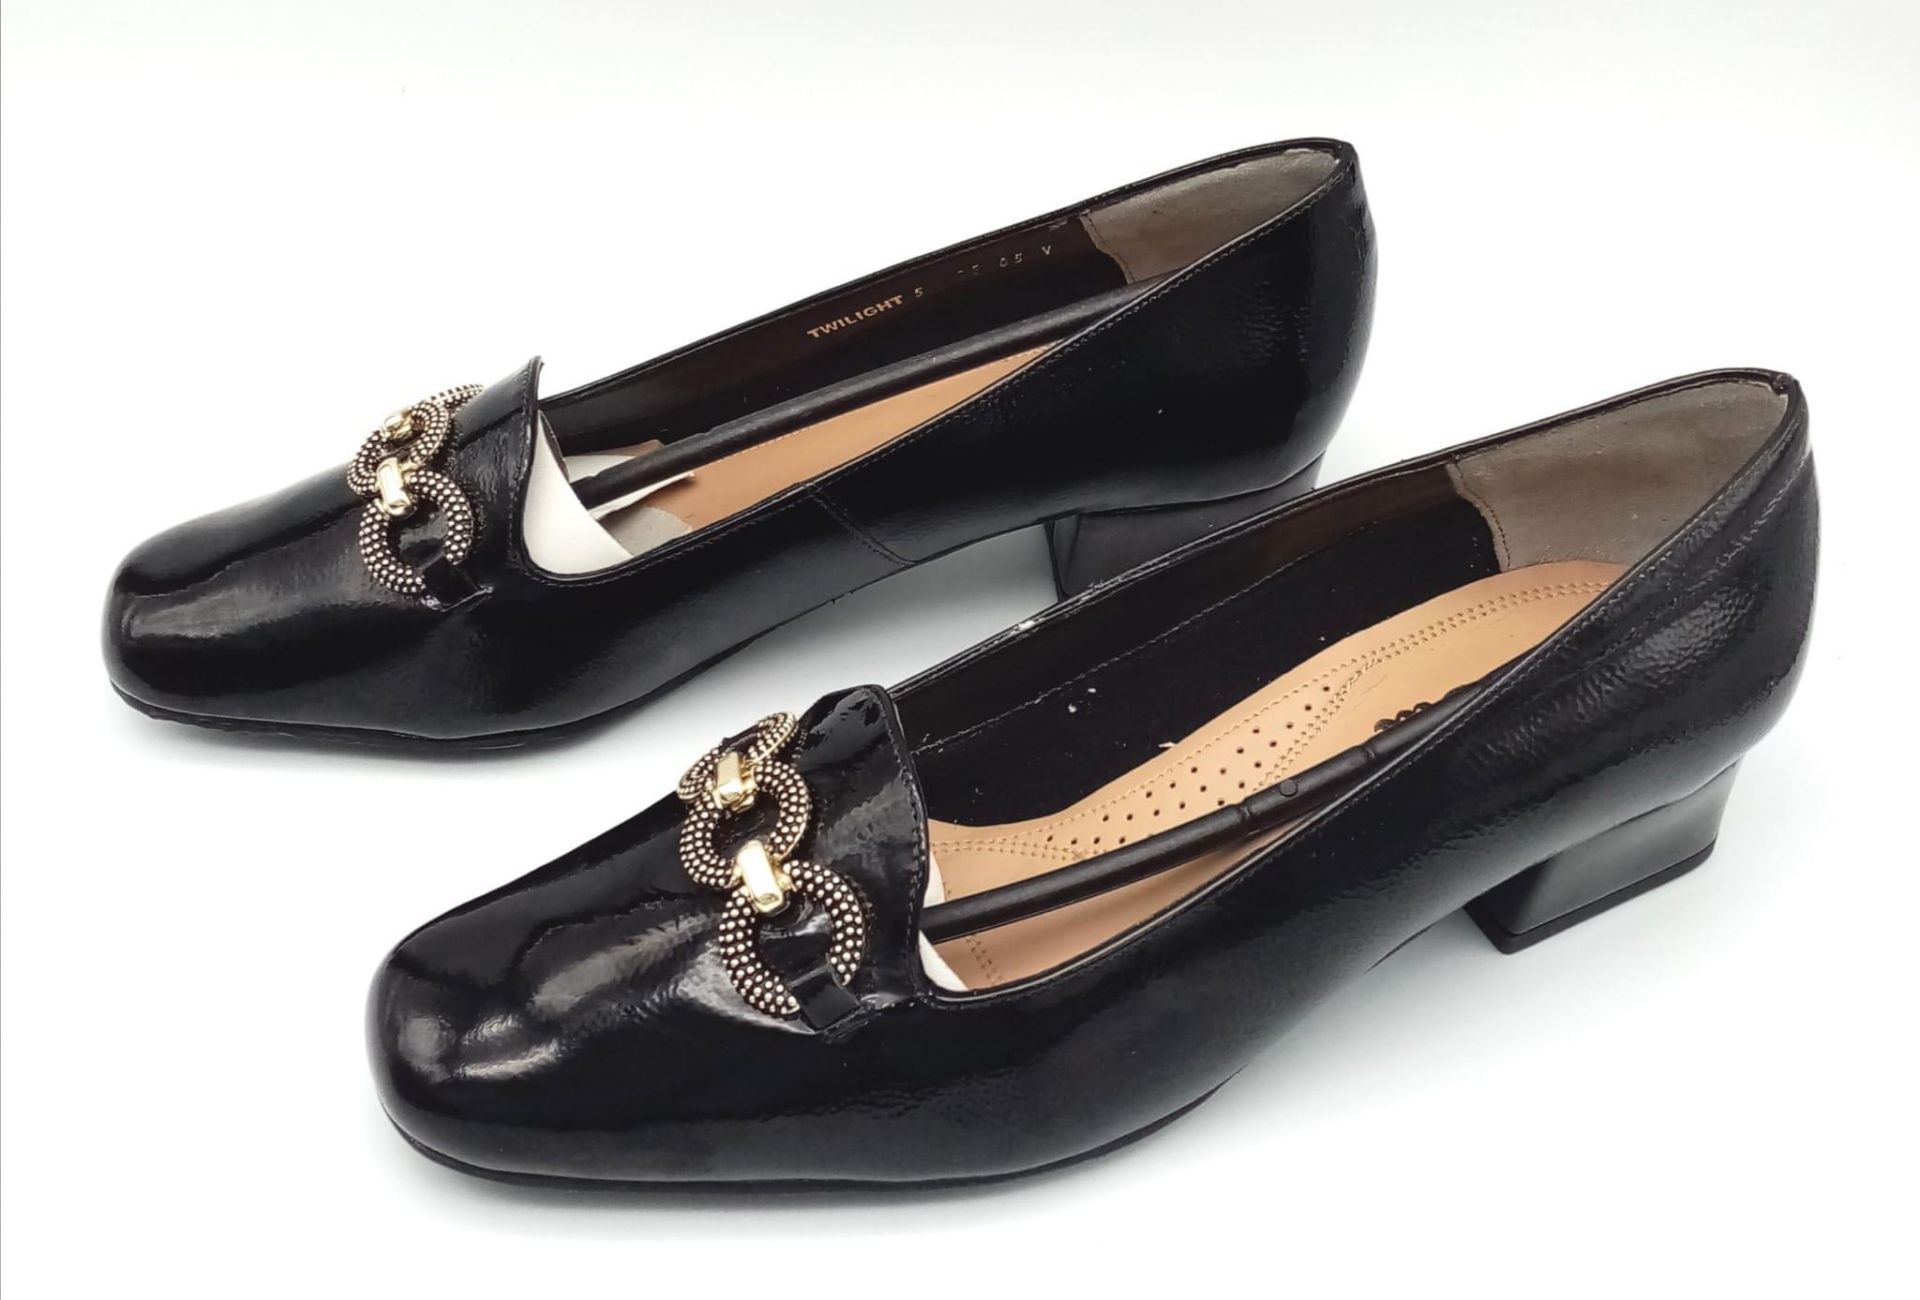 A Pair of Van Dal Twilight Black Patent Court Shoes, New in Box. Size UK5 (EU 38). - Image 2 of 4